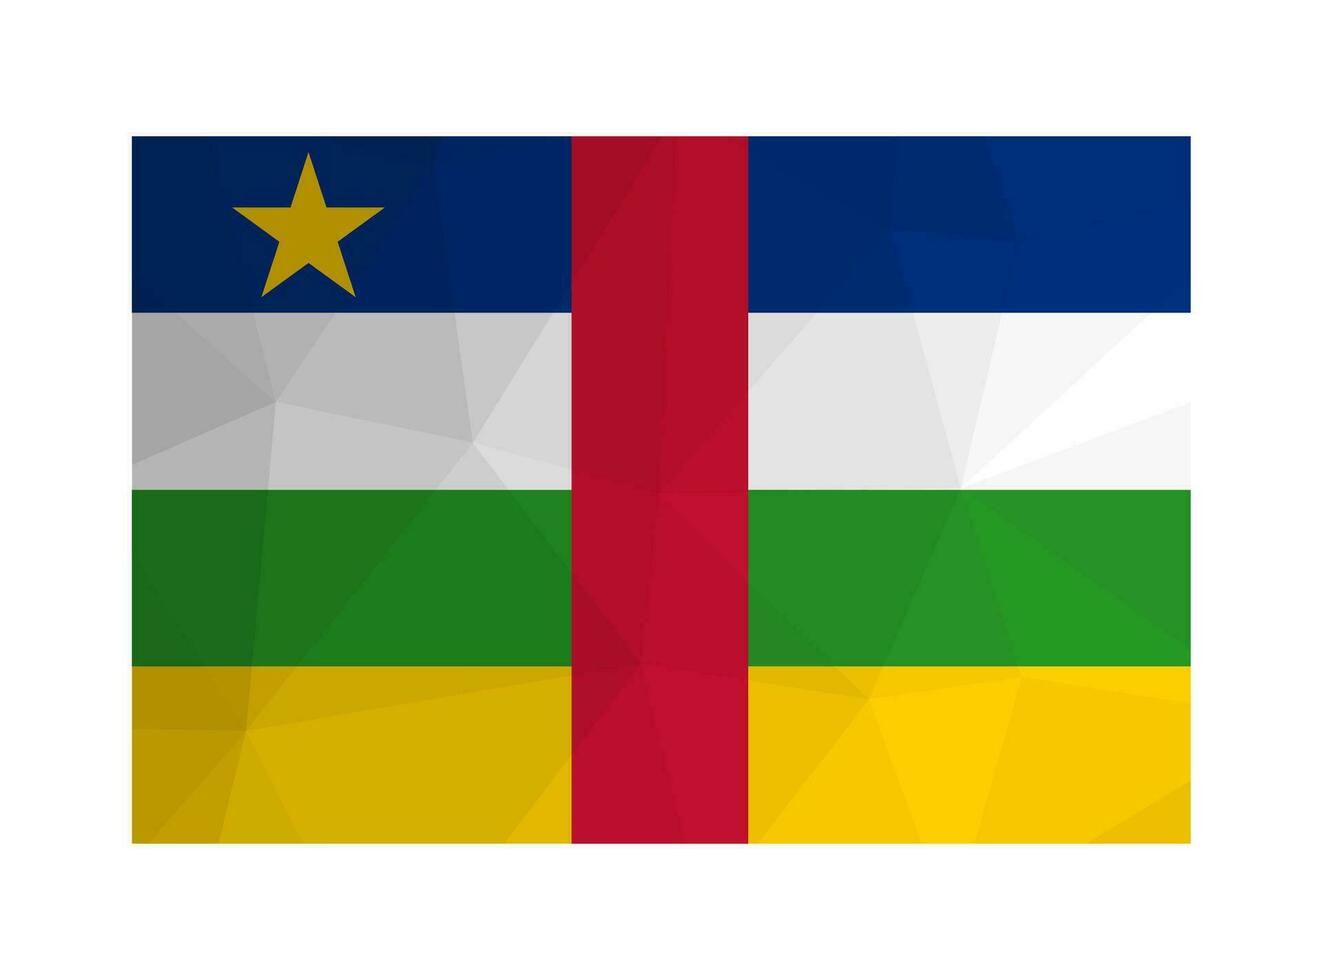 Vector isolated illustration. Official symbol of Central African Republic. National flag with blue, white, green, red, yellow stripes and star. Design in low poly style with triangular shapes.